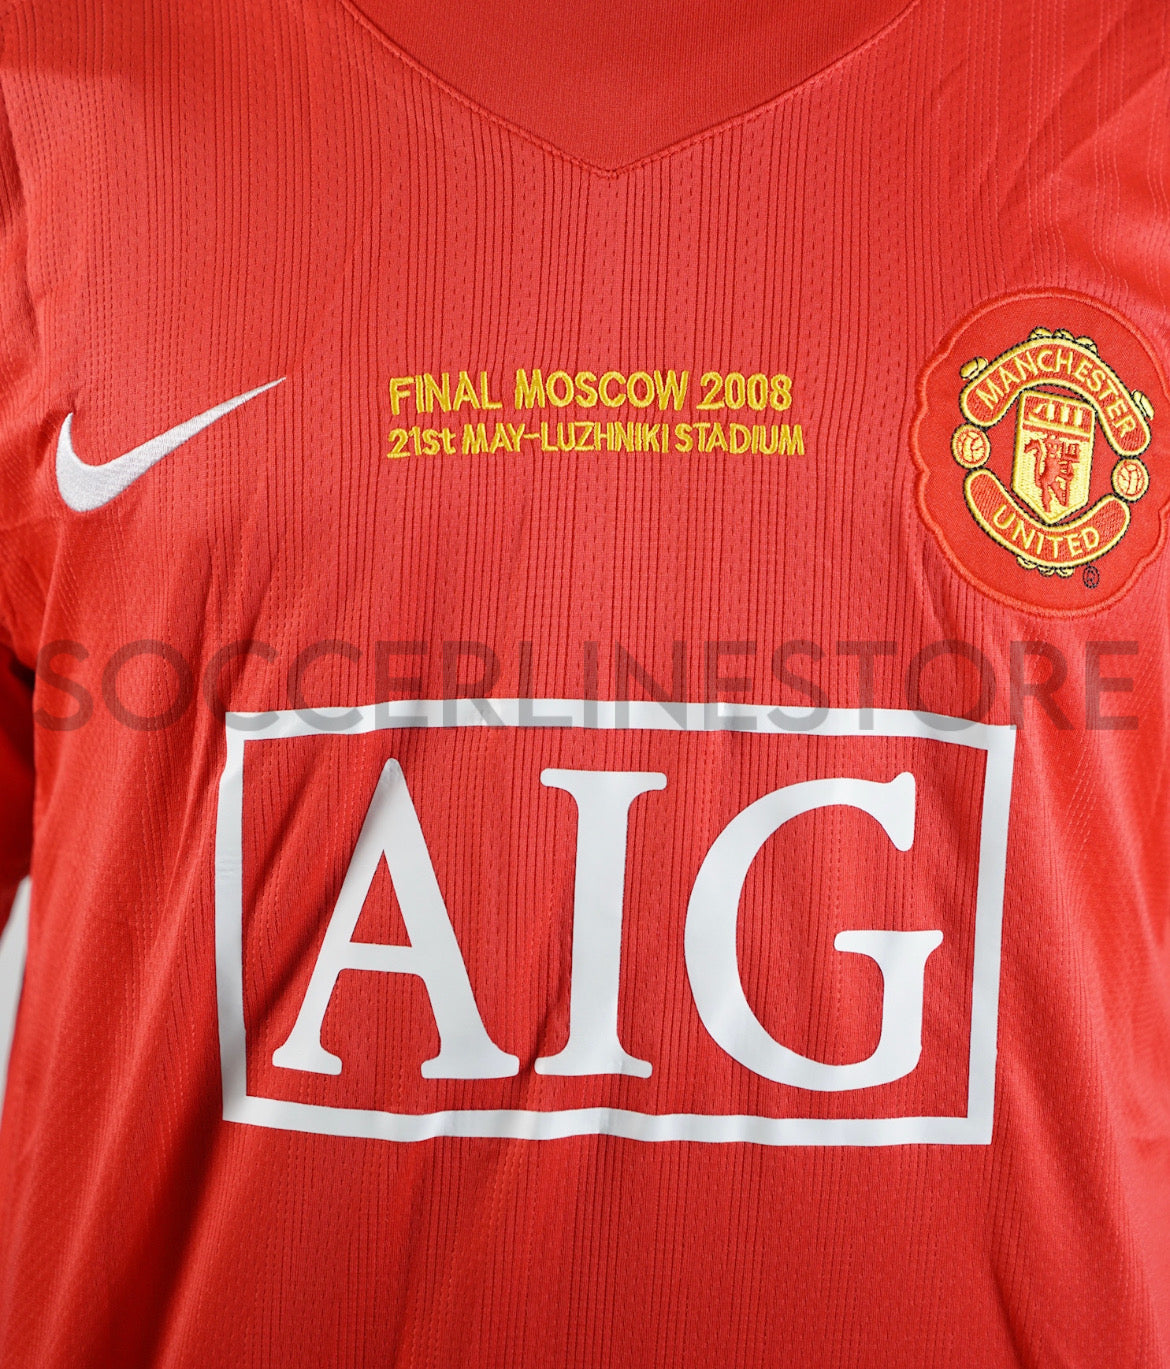 Manchester United 2007/2008 Champions League Final